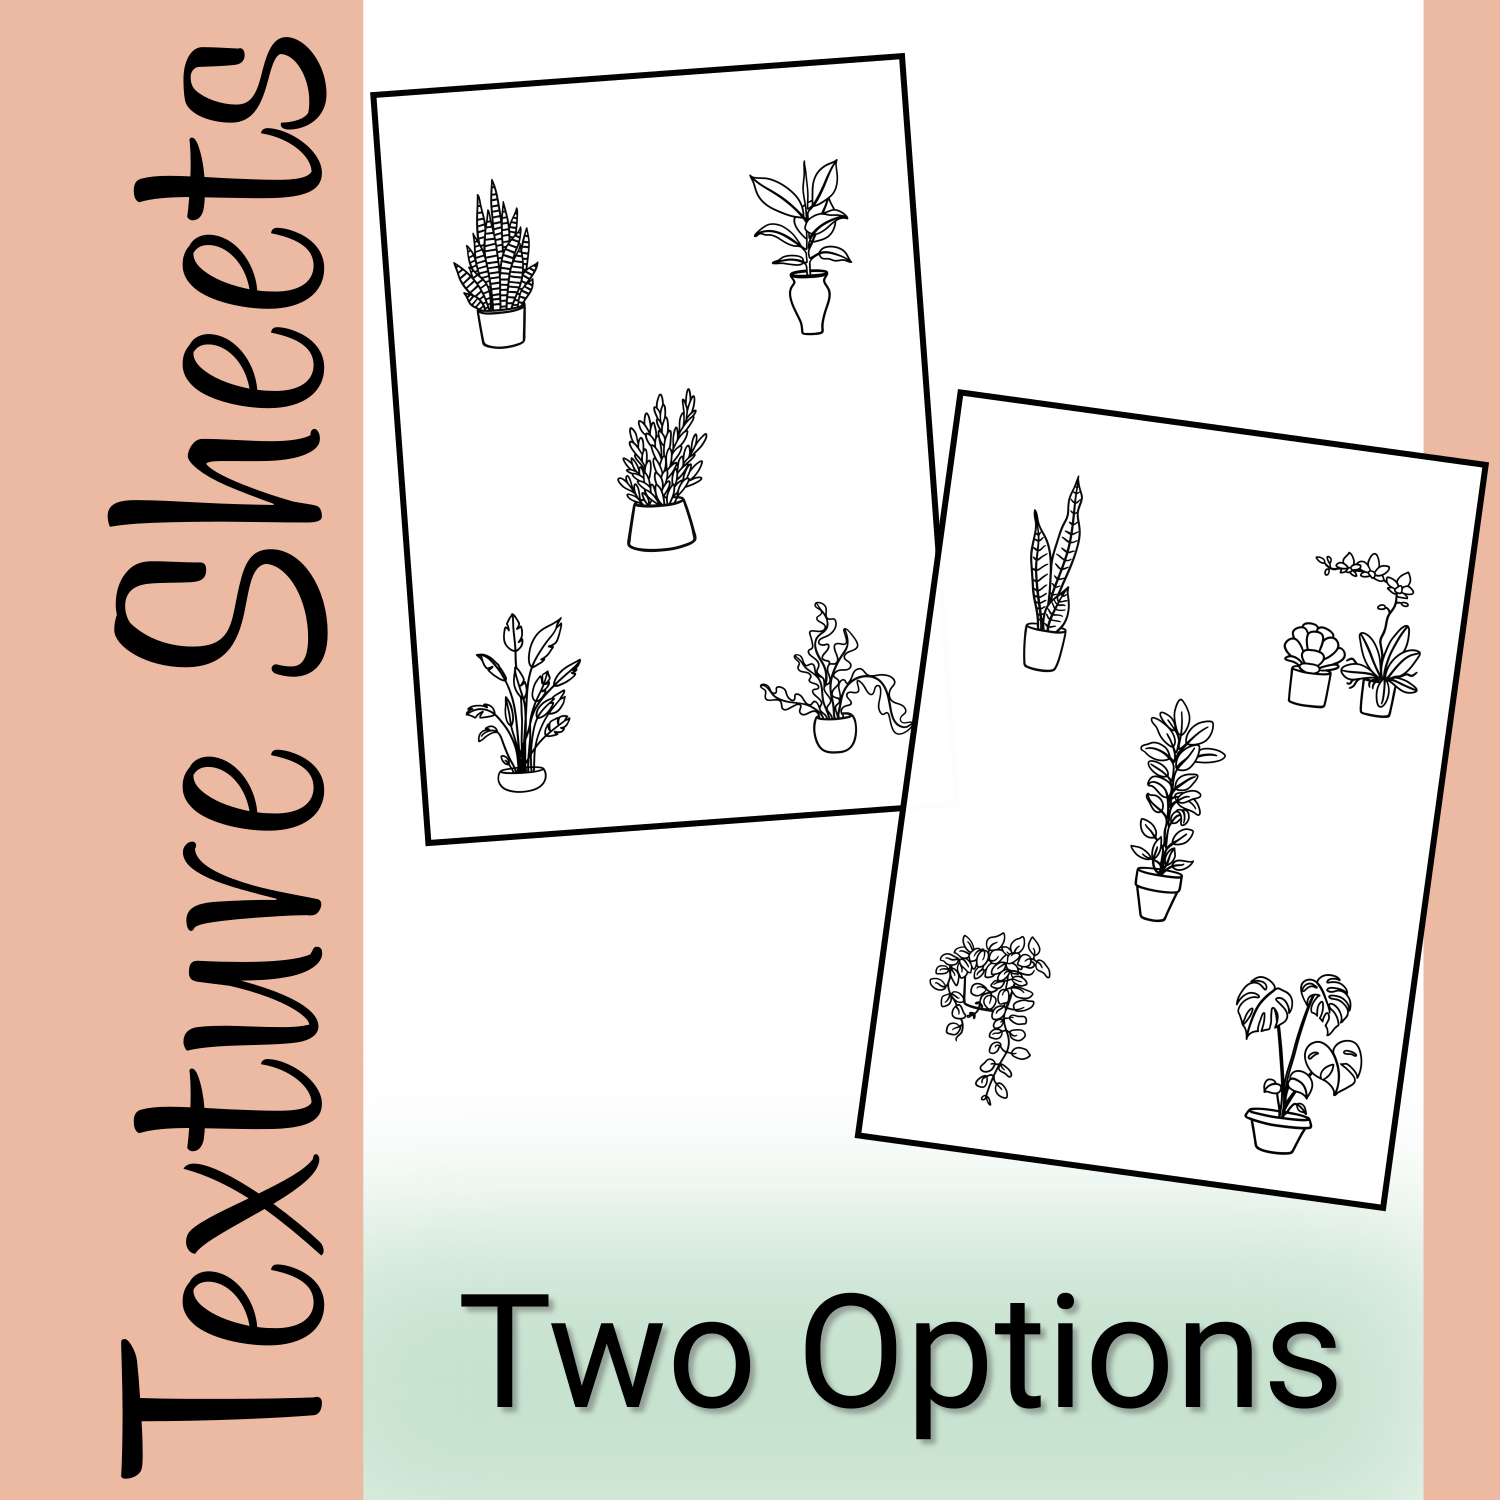 Two options for Potted Plants design texture sheet. One Texture Sheet consists of five potted plants designs